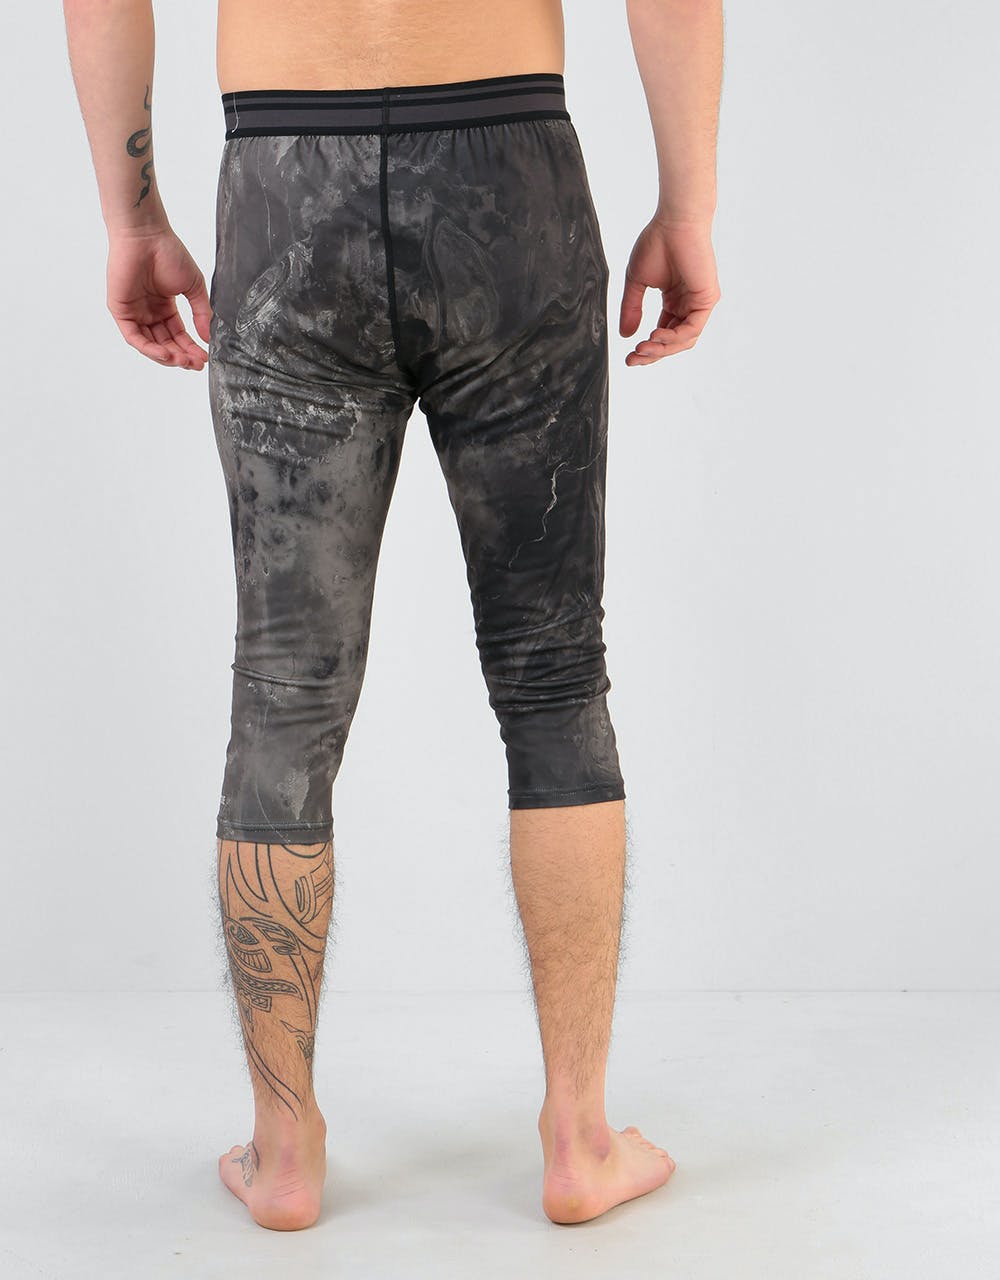 Burton Midweight Shant Thermal Bottoms - Marble Galaxy